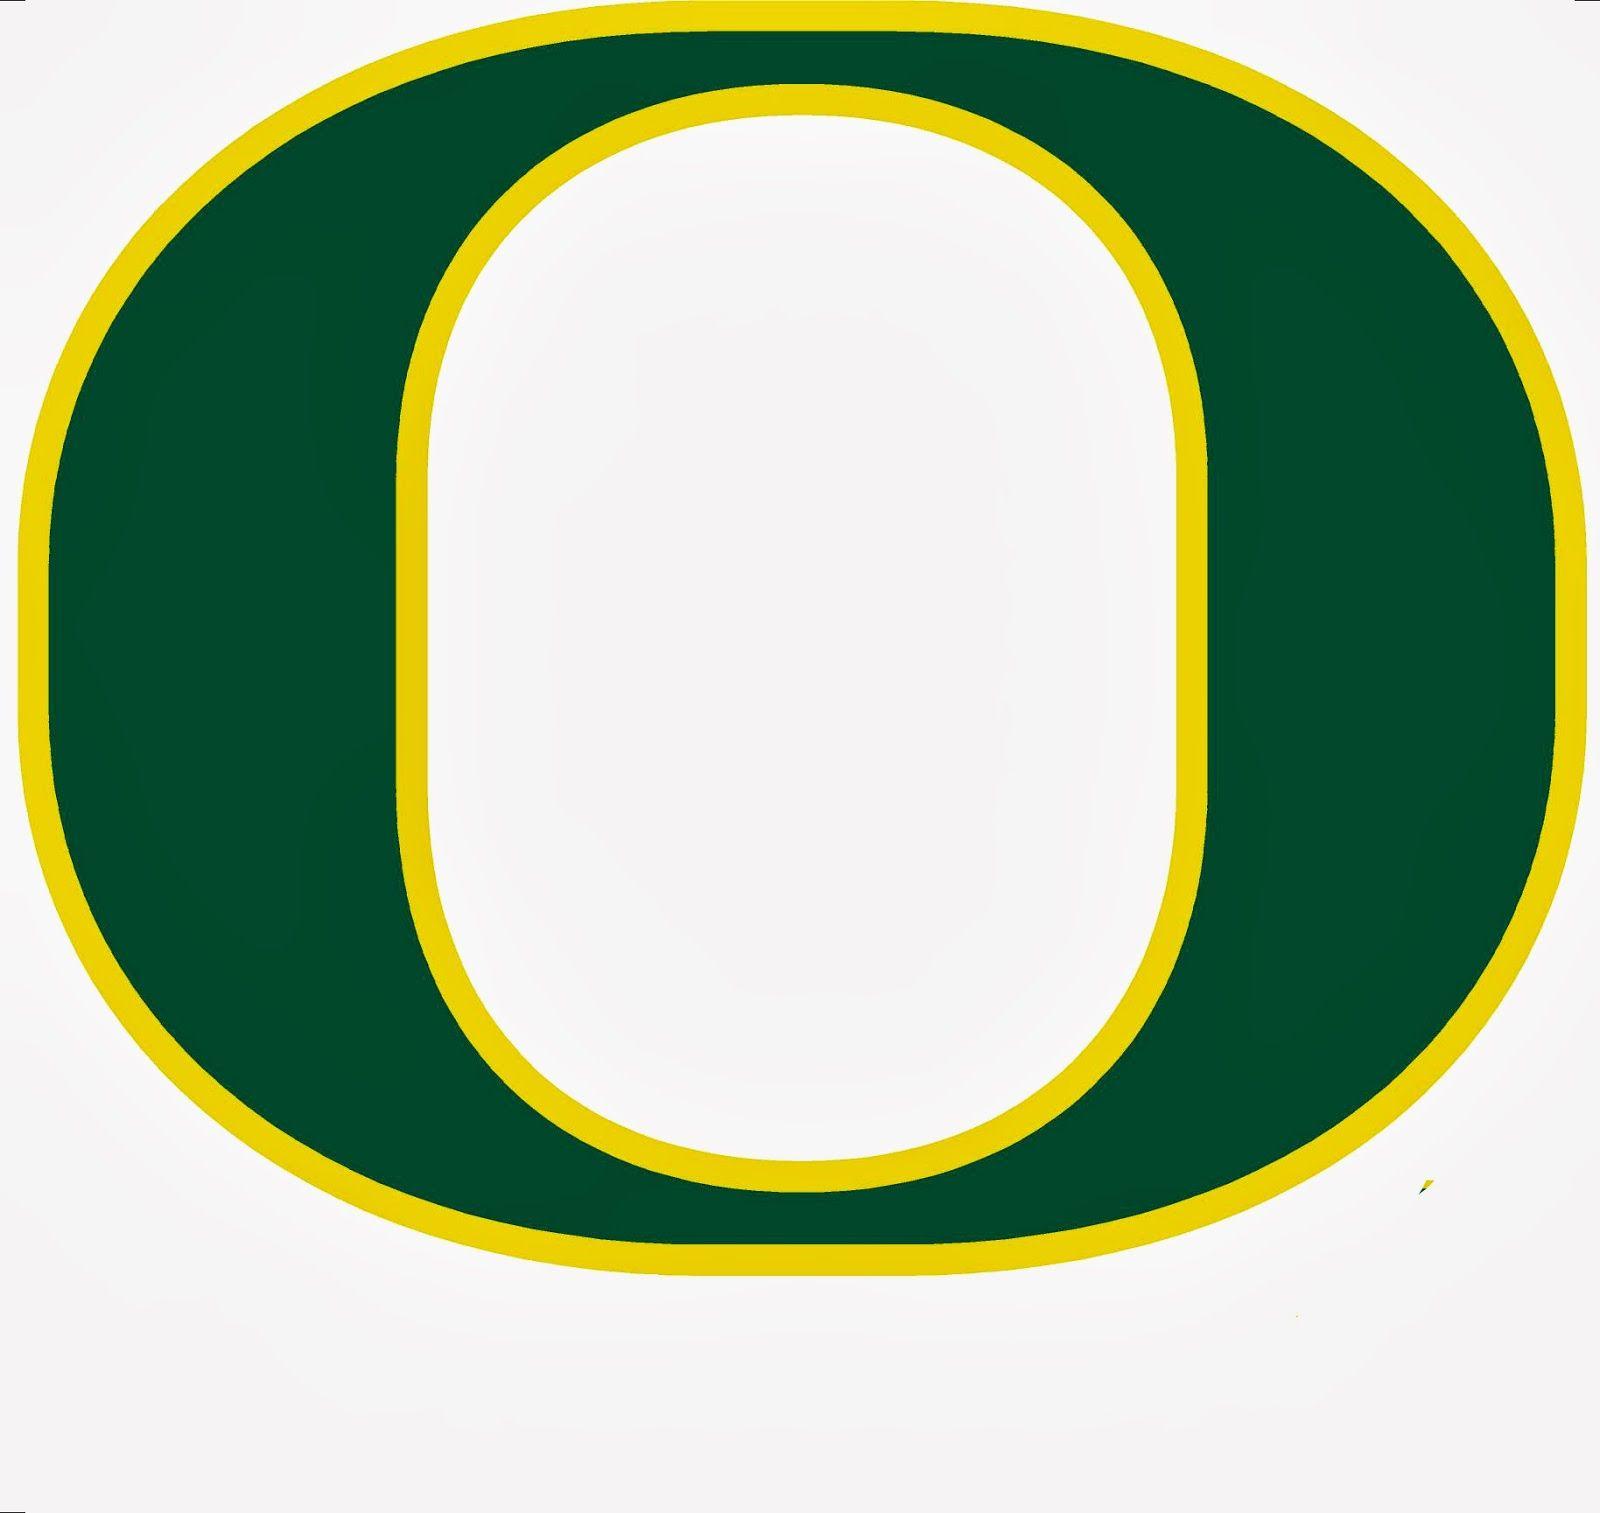 UO Logo - Bend OR Bust: University of Oregon almost a private school